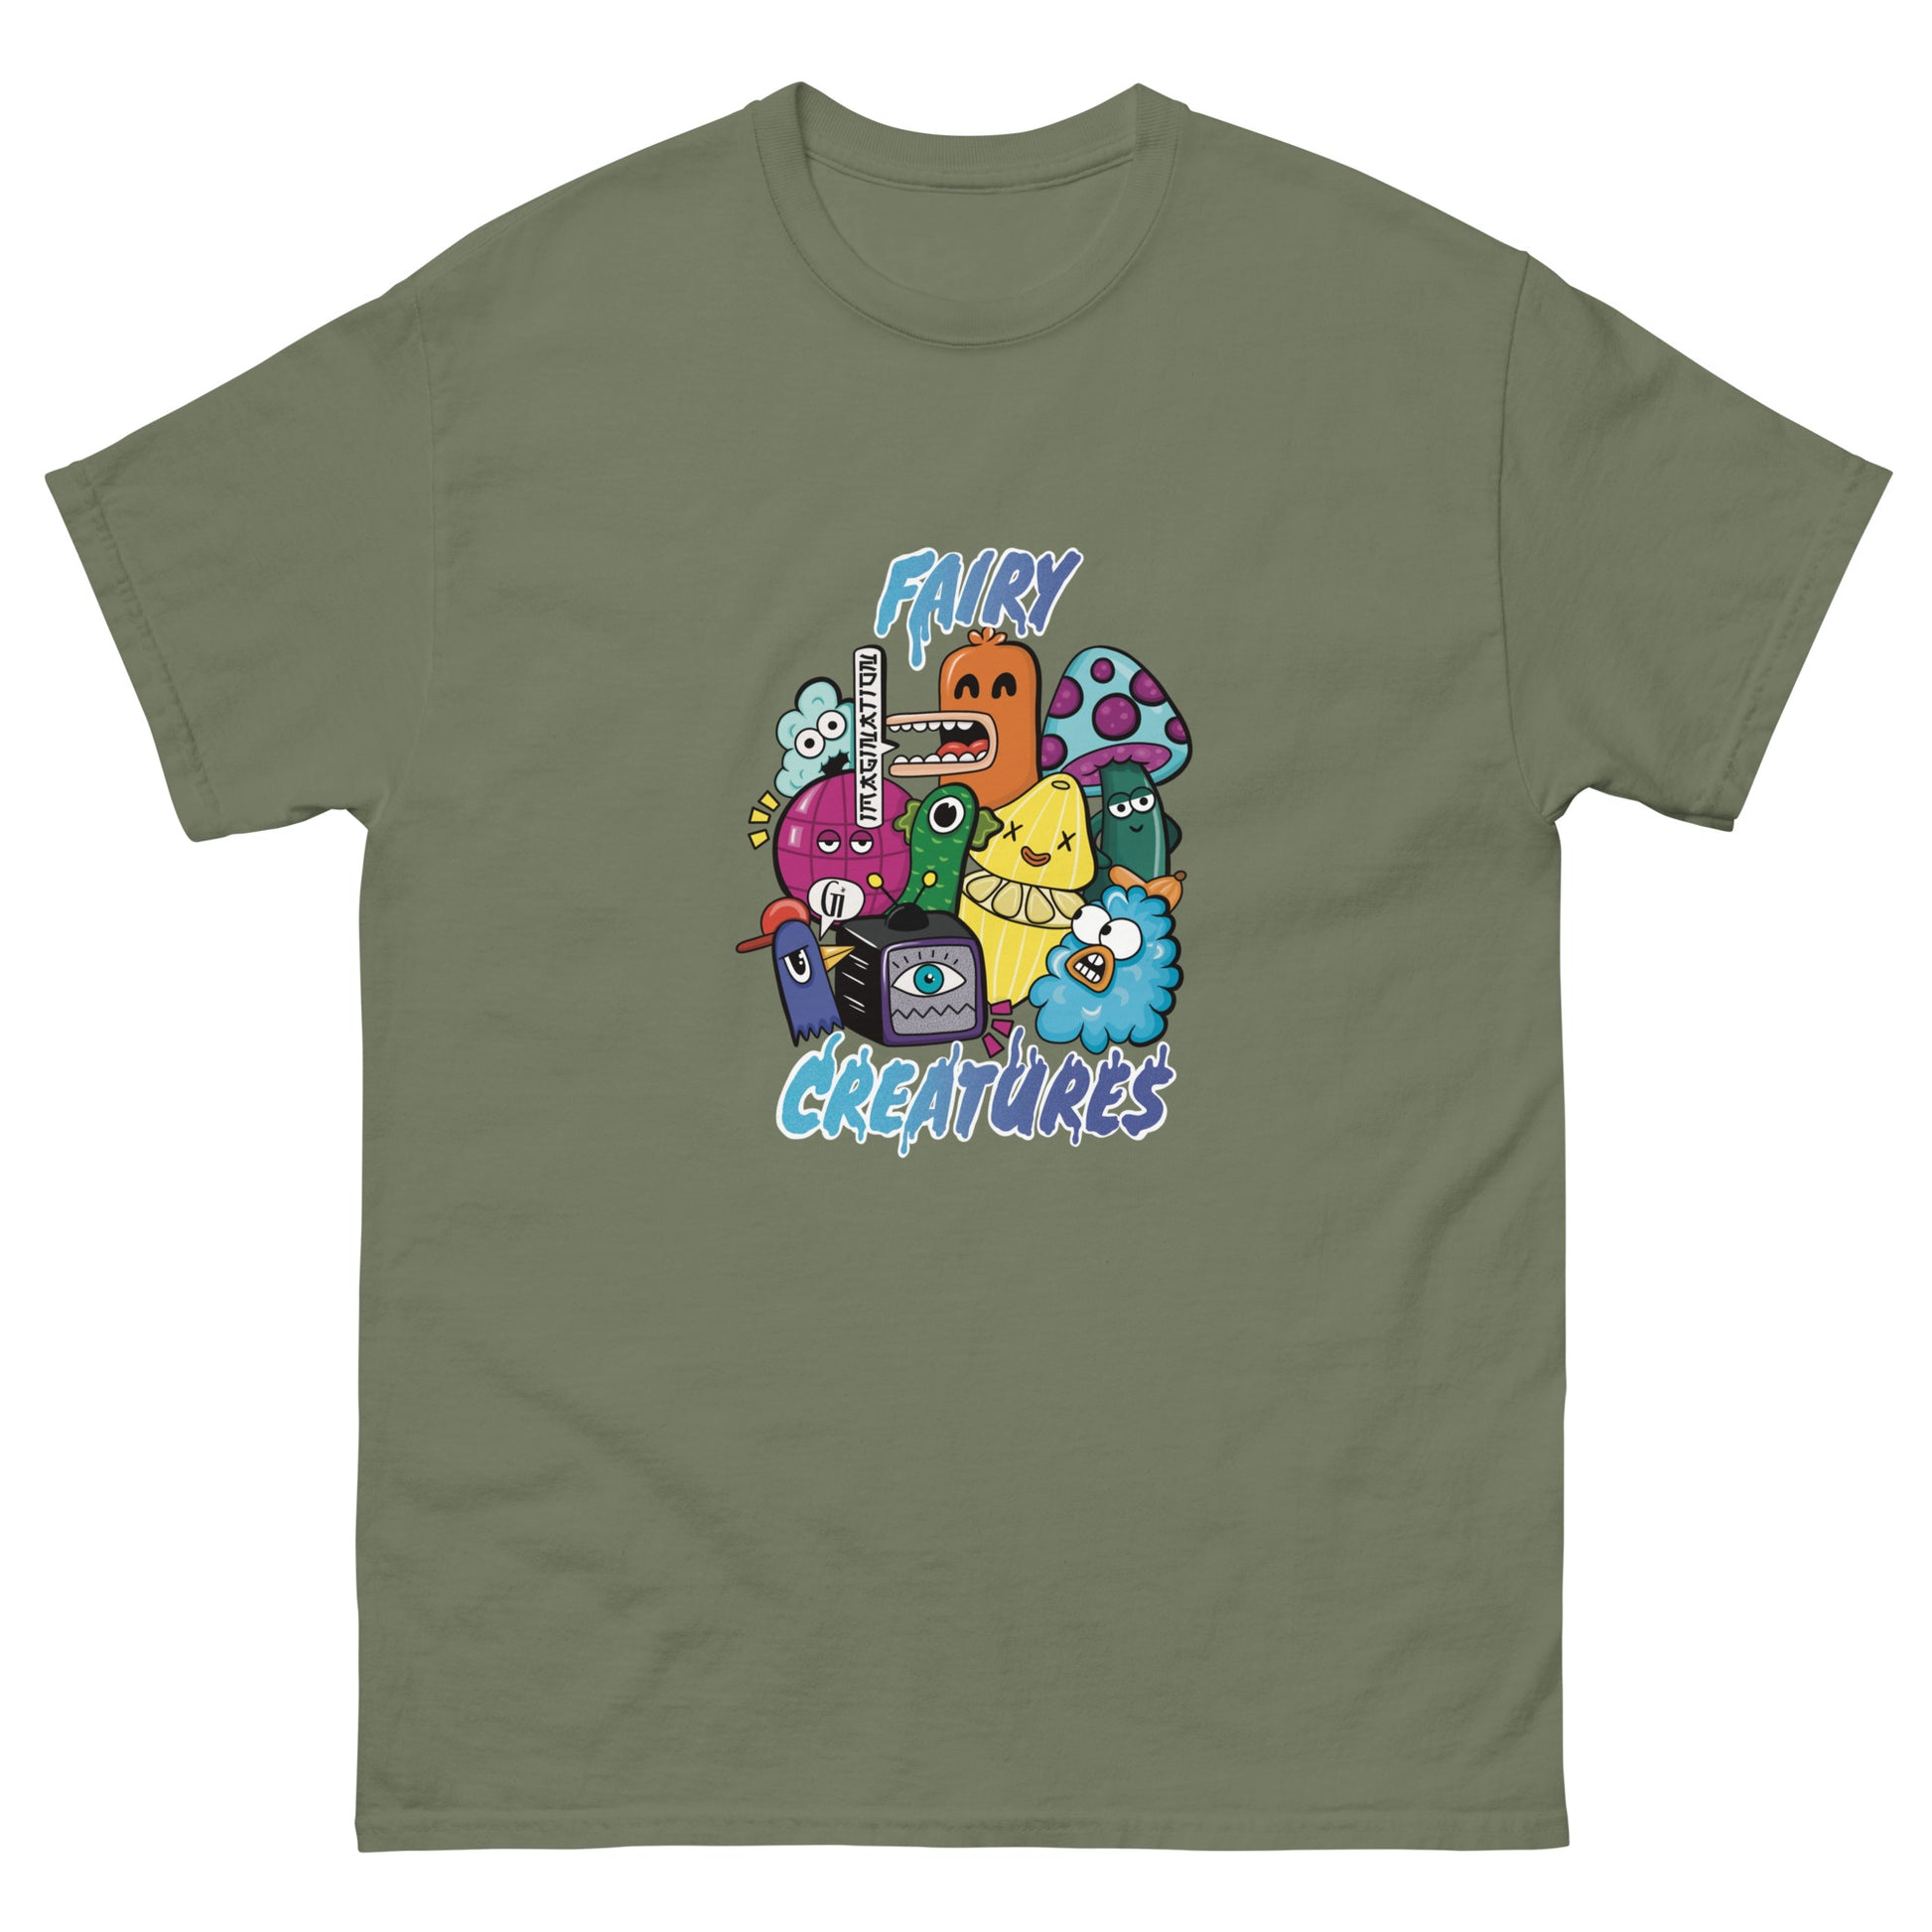 military green color cotton t shirt with fairy creatures